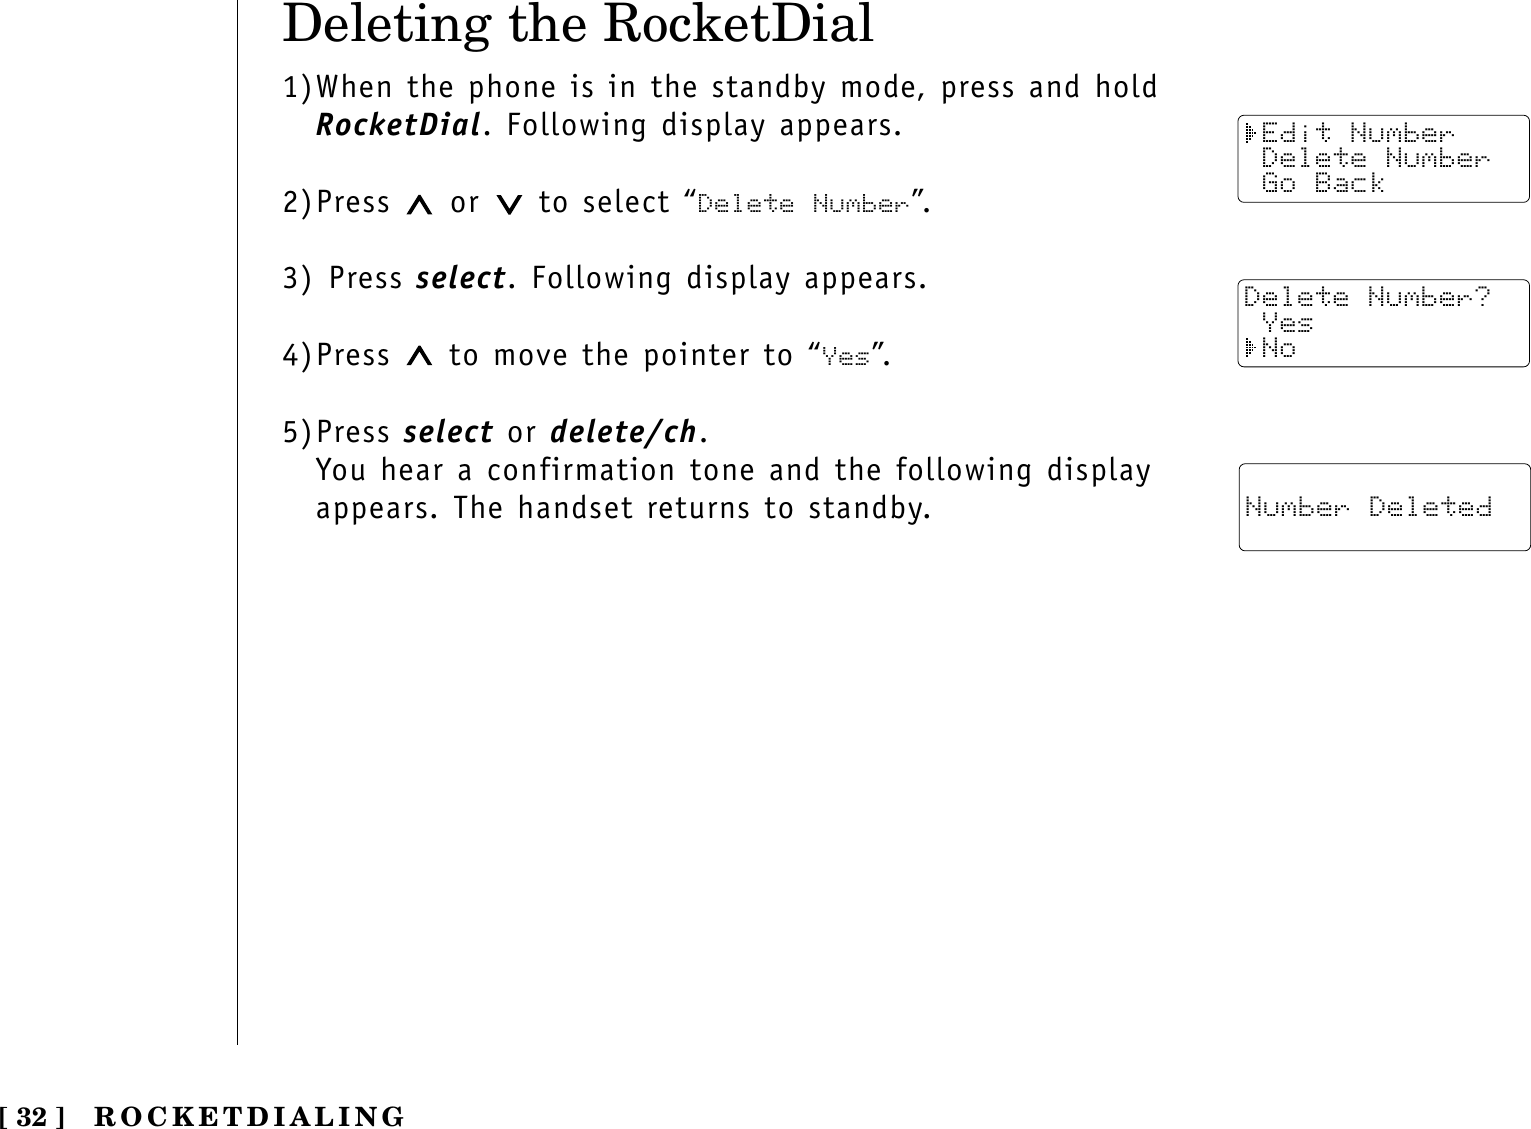 Deleting the RocketDial1)When the phone is in the standby mode, press and holdRocketDial. Following display appears.2)Press  or  to select “Delete Number”.3) Press select. Following display appears.4)Press  to move the pointer to “Yes”.5)Press select or delete/ch.You hear a confirmation tone and the following displayappears. The handset returns to standby.ROCKETDIALING[ 32 ] Edit Number Delete Number Go BackDelete Number? Yes No Number Deleted